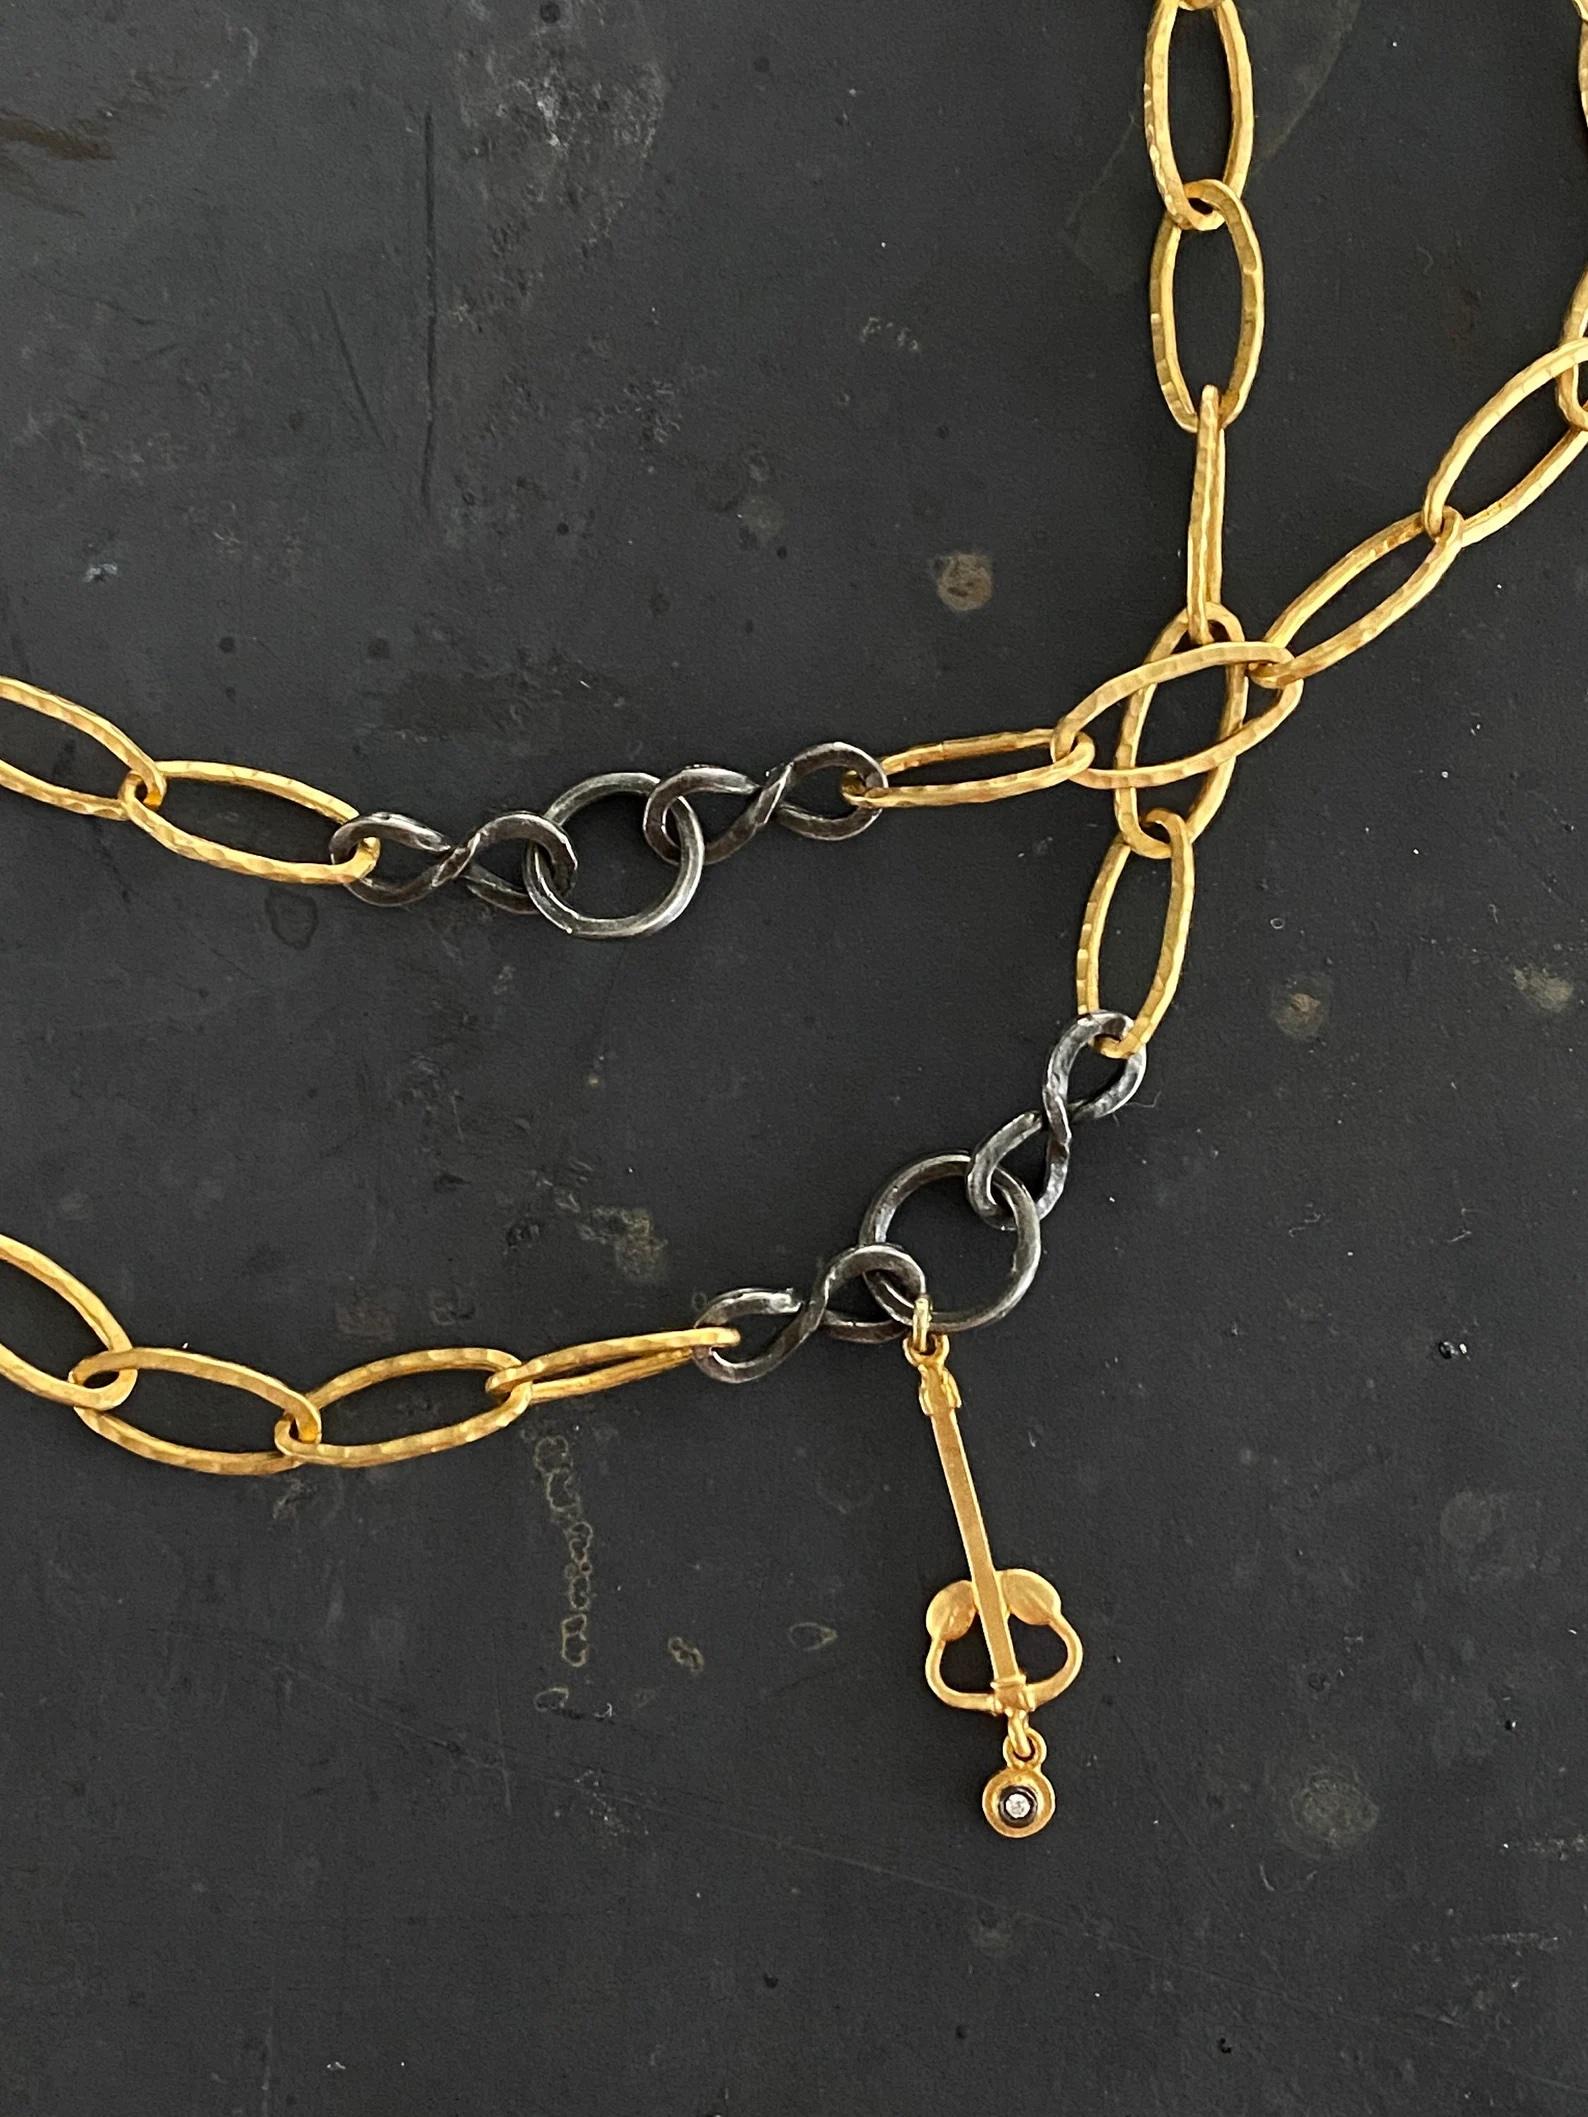 Chain of Goldenhorn 24K Gold & Silver w/ Diamonds, by Kurtulan Jewellery In New Condition For Sale In Bozeman, MT